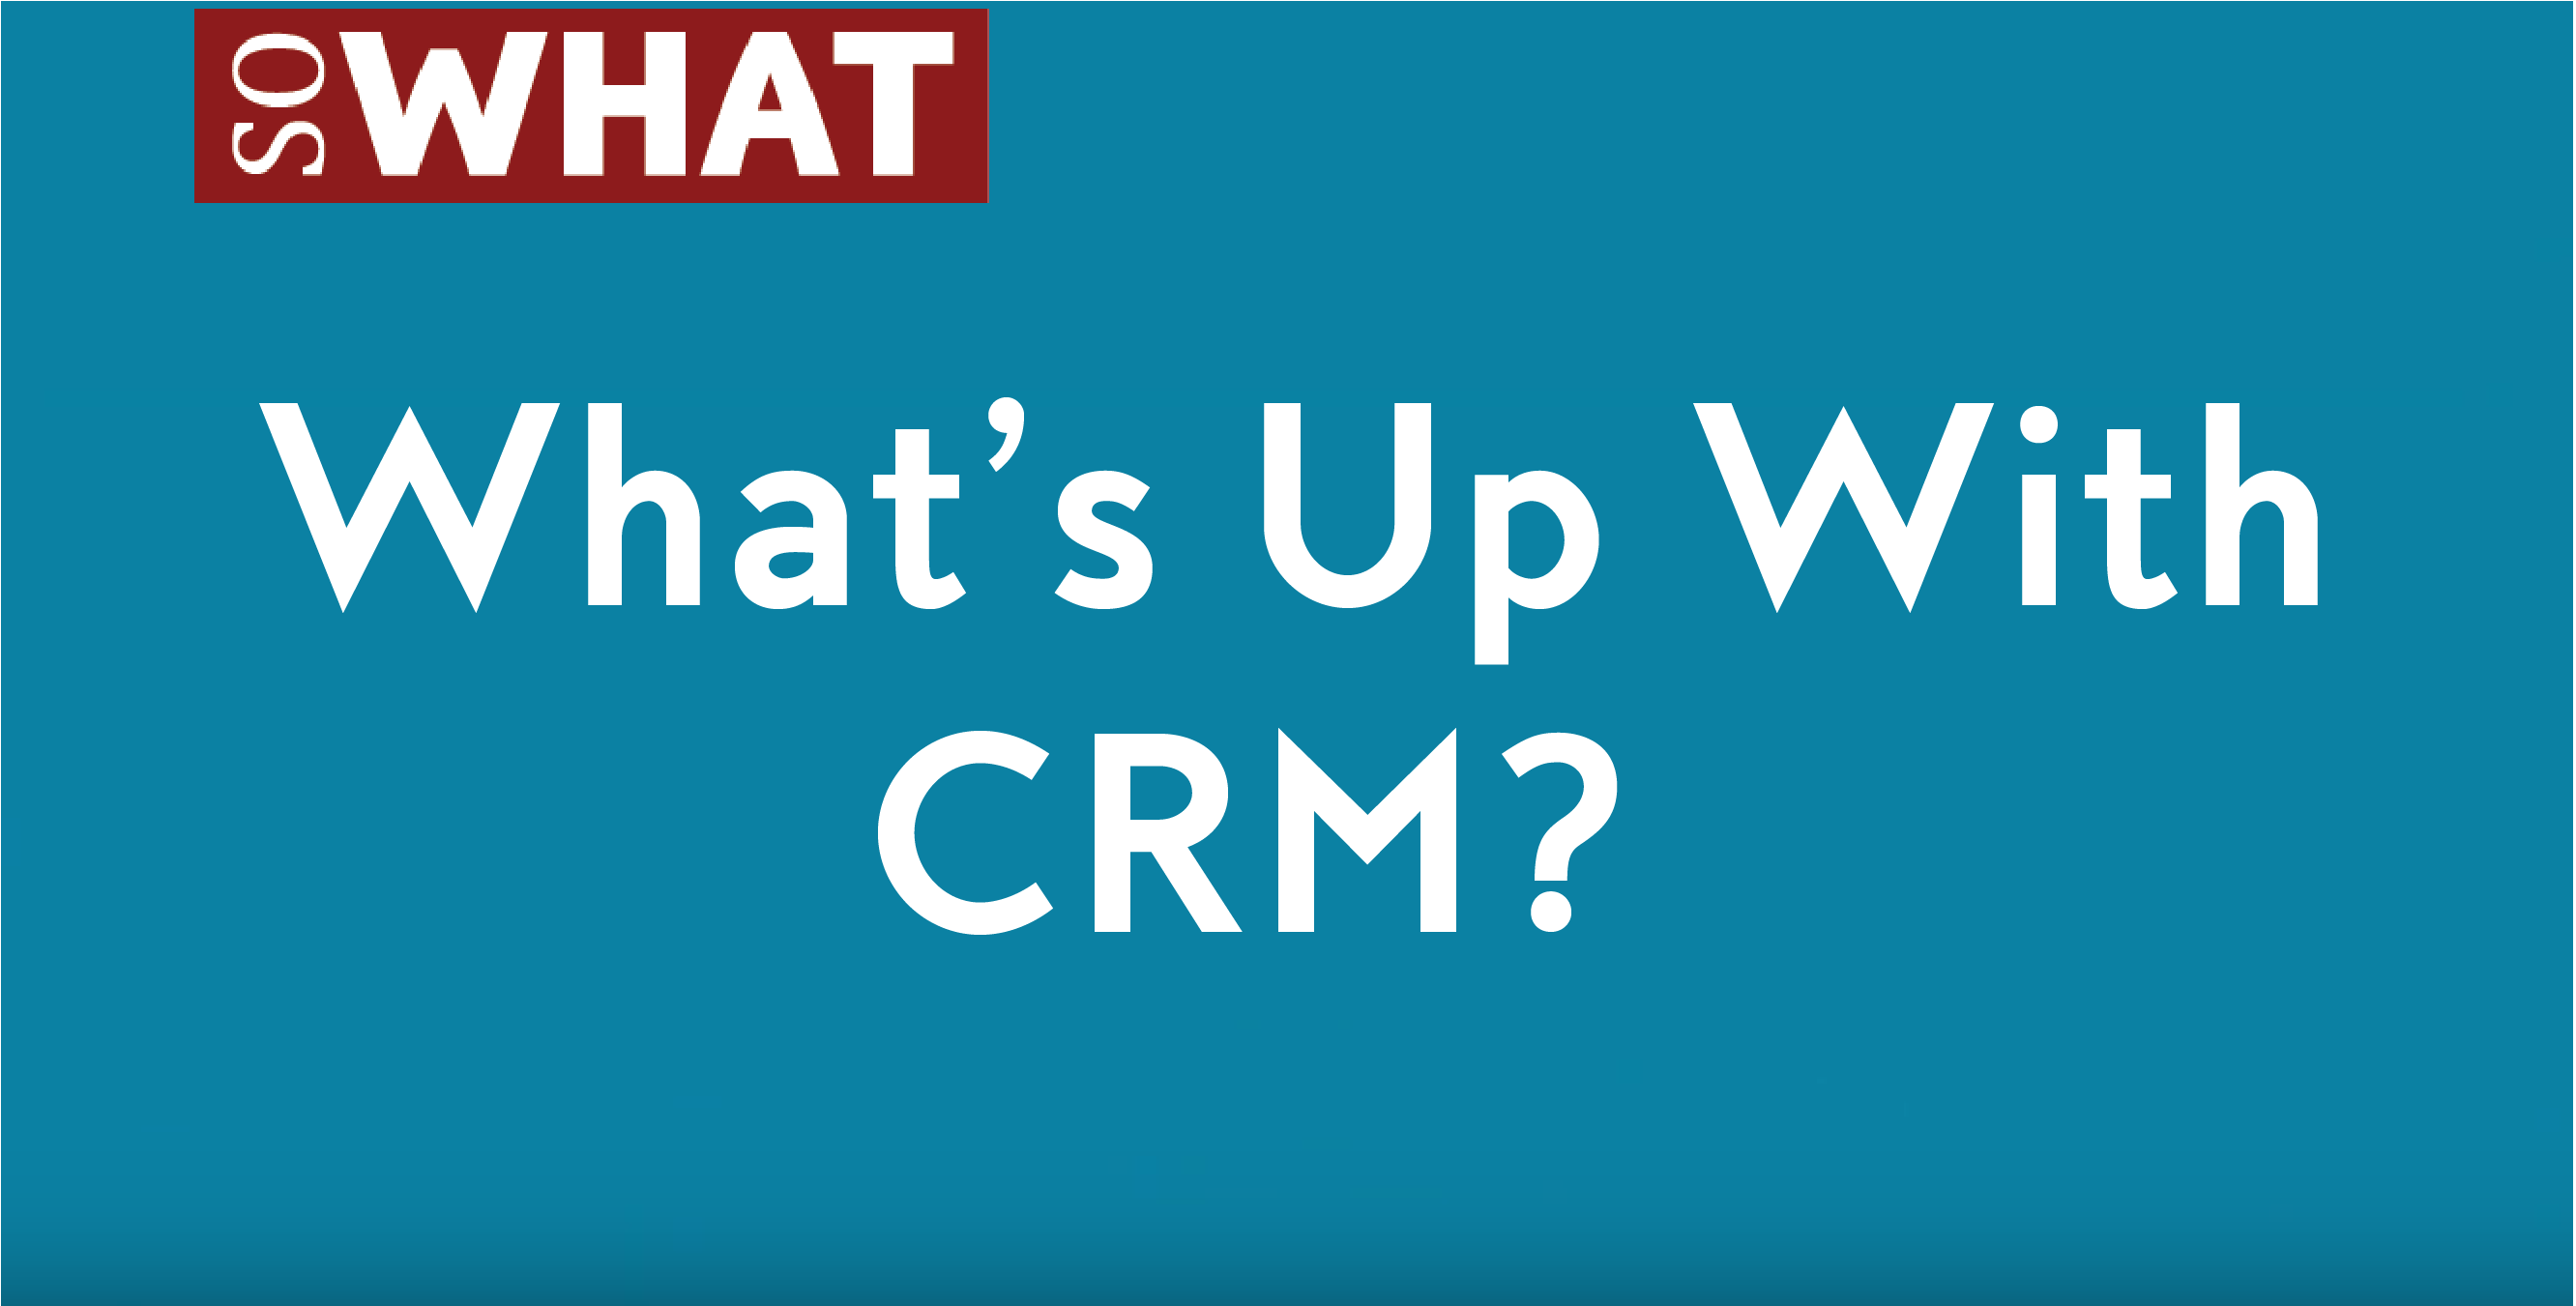 Whats Up With CRM?